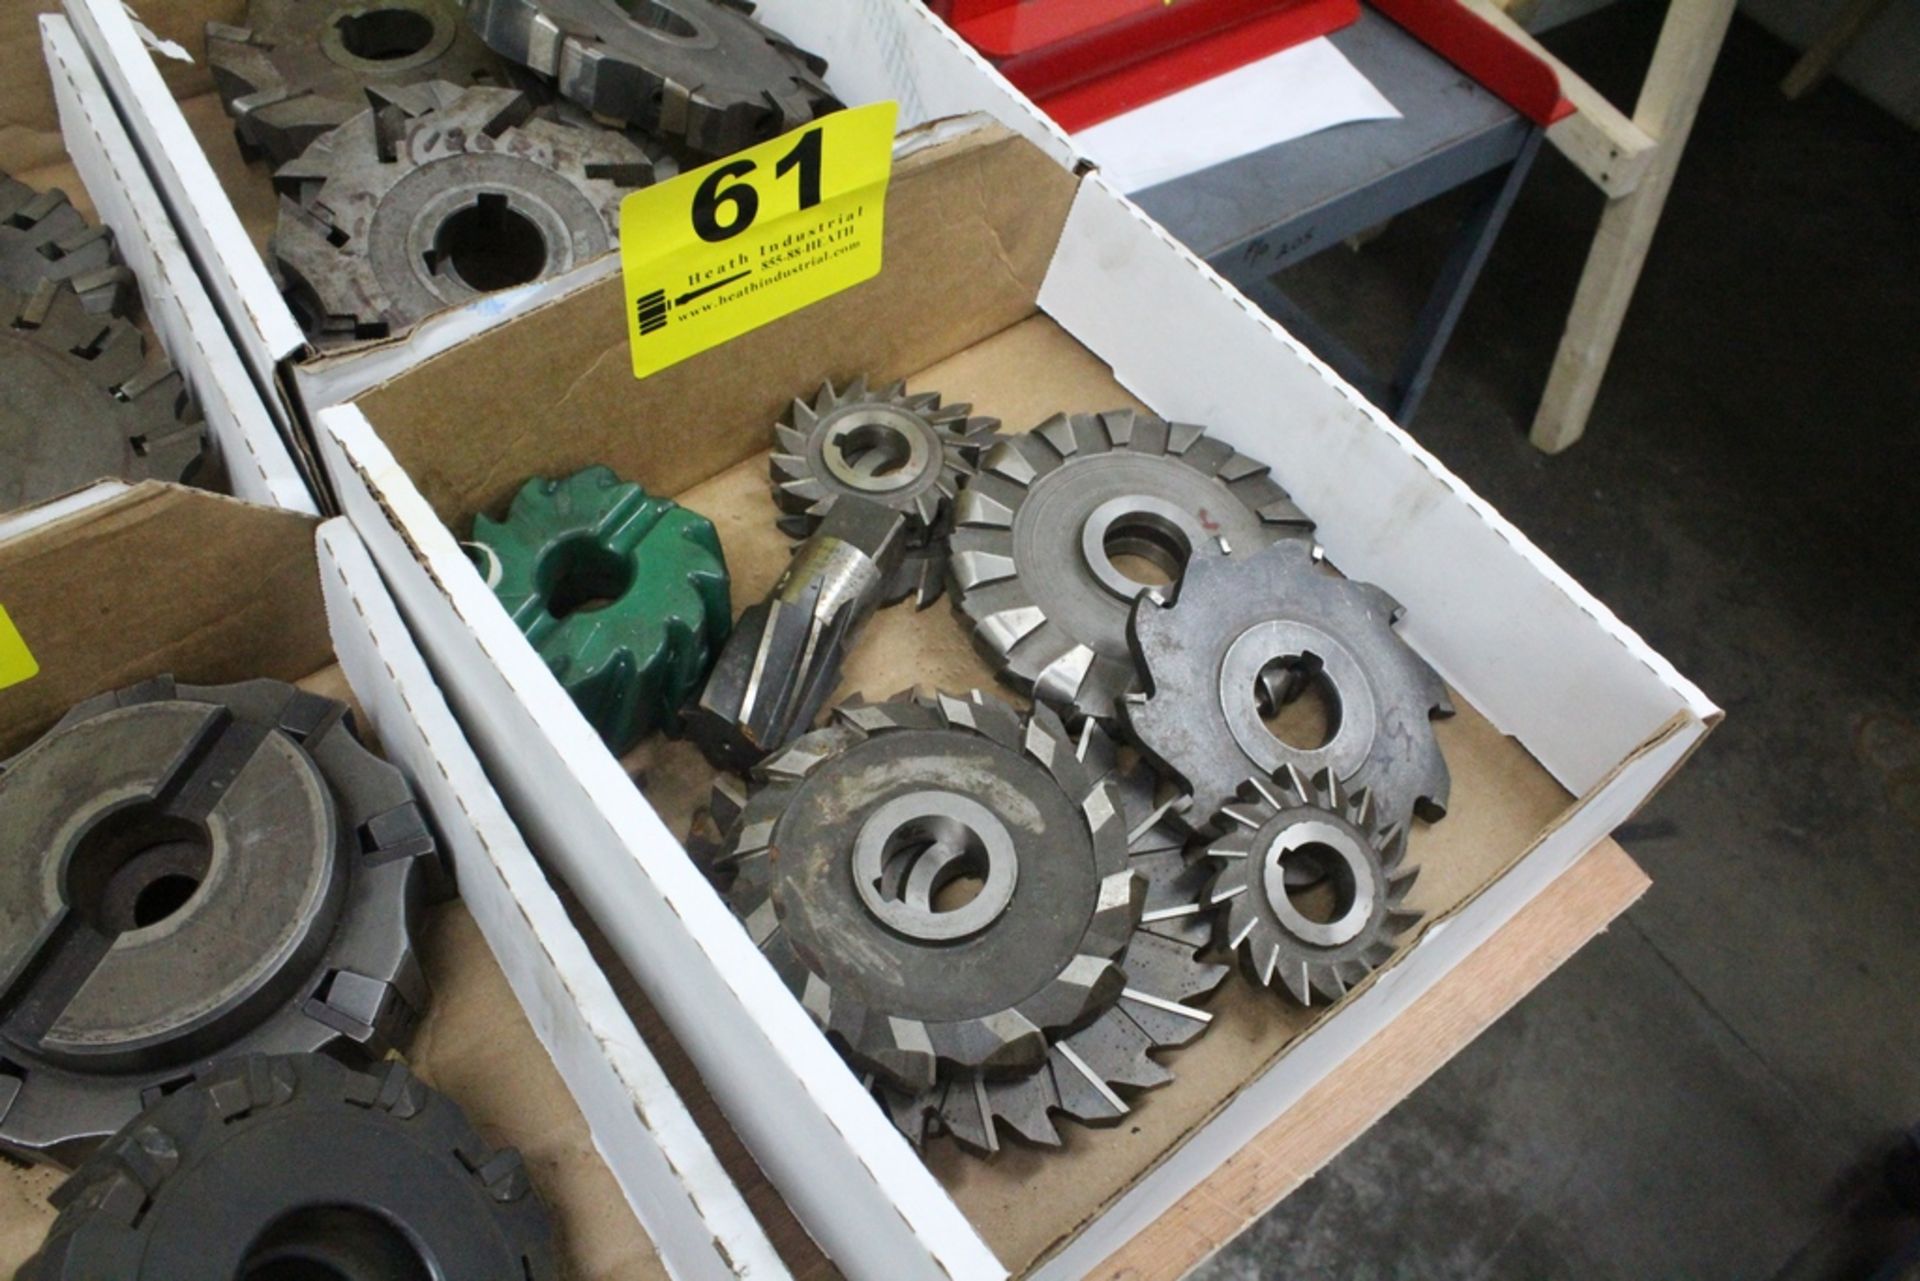 ASSORTED MILLING CUTTERS IN BOX